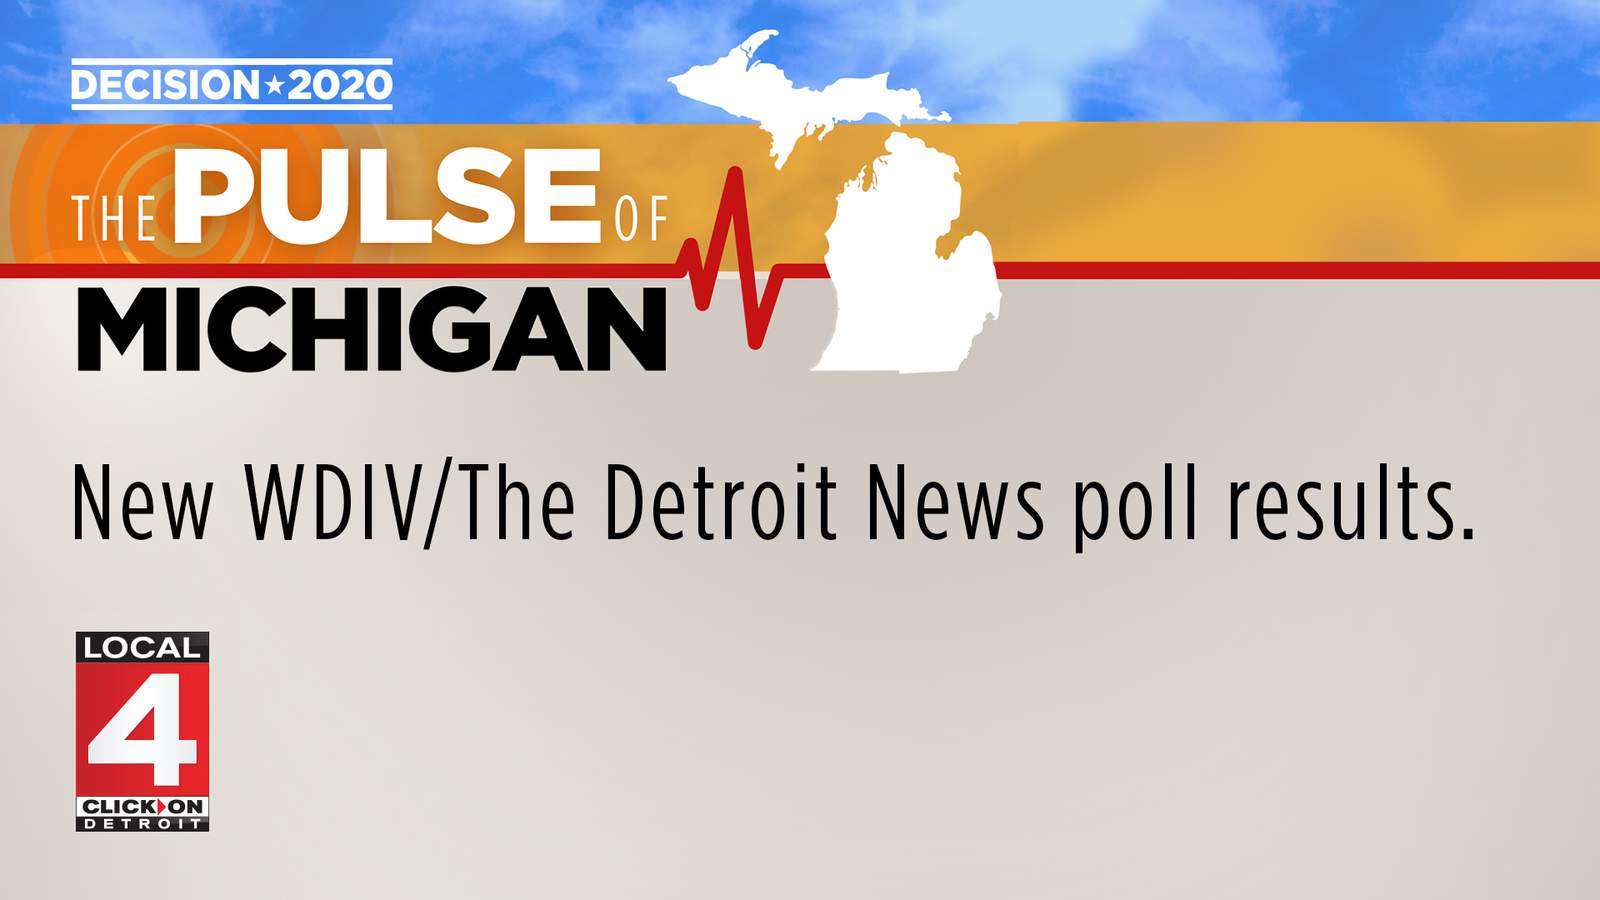 New WDIV/The Detroit News poll